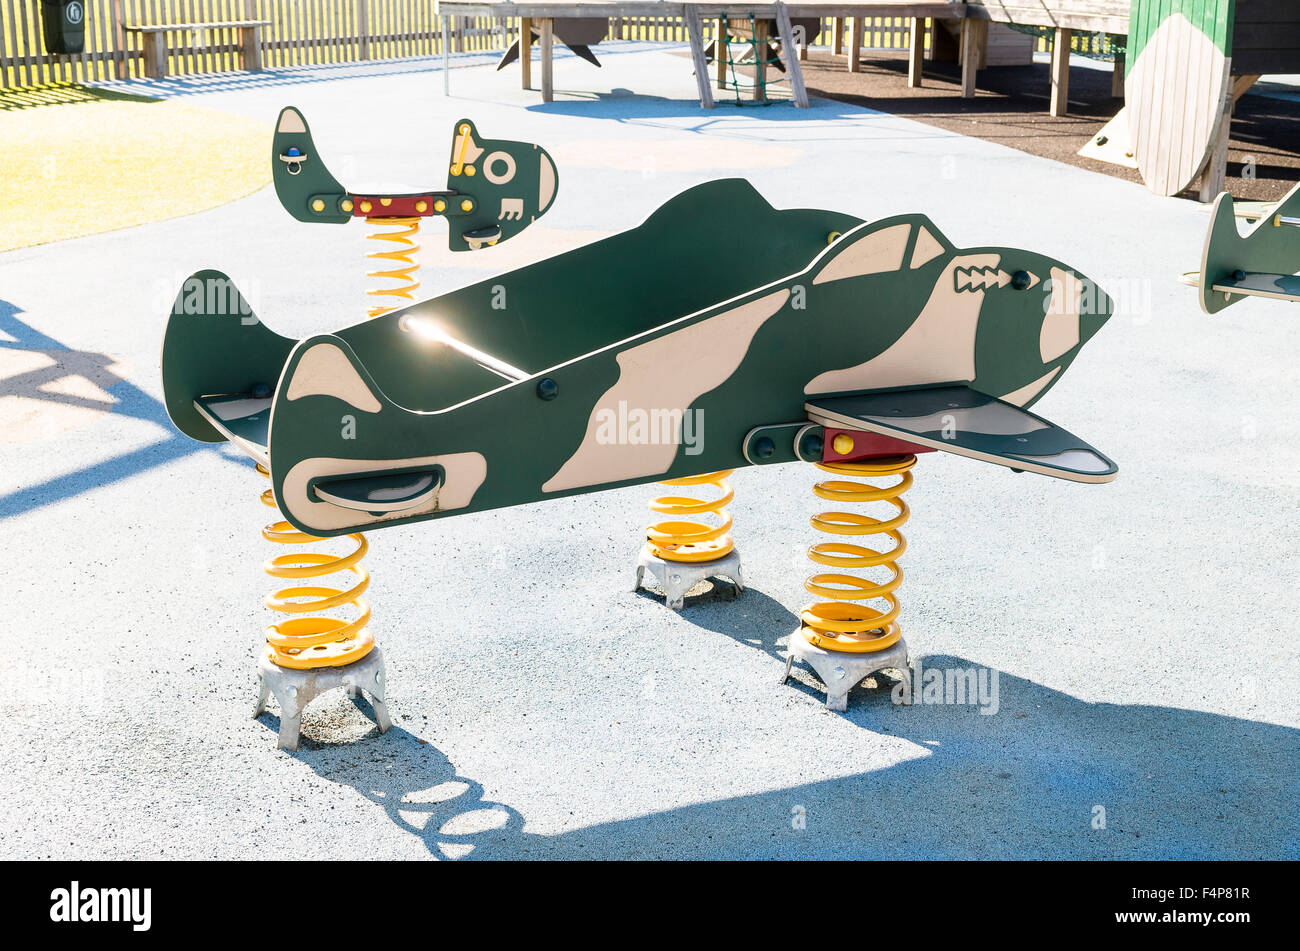 Aviation themed playground equipment with bouncy plane like a DH Vampire Stock Photo